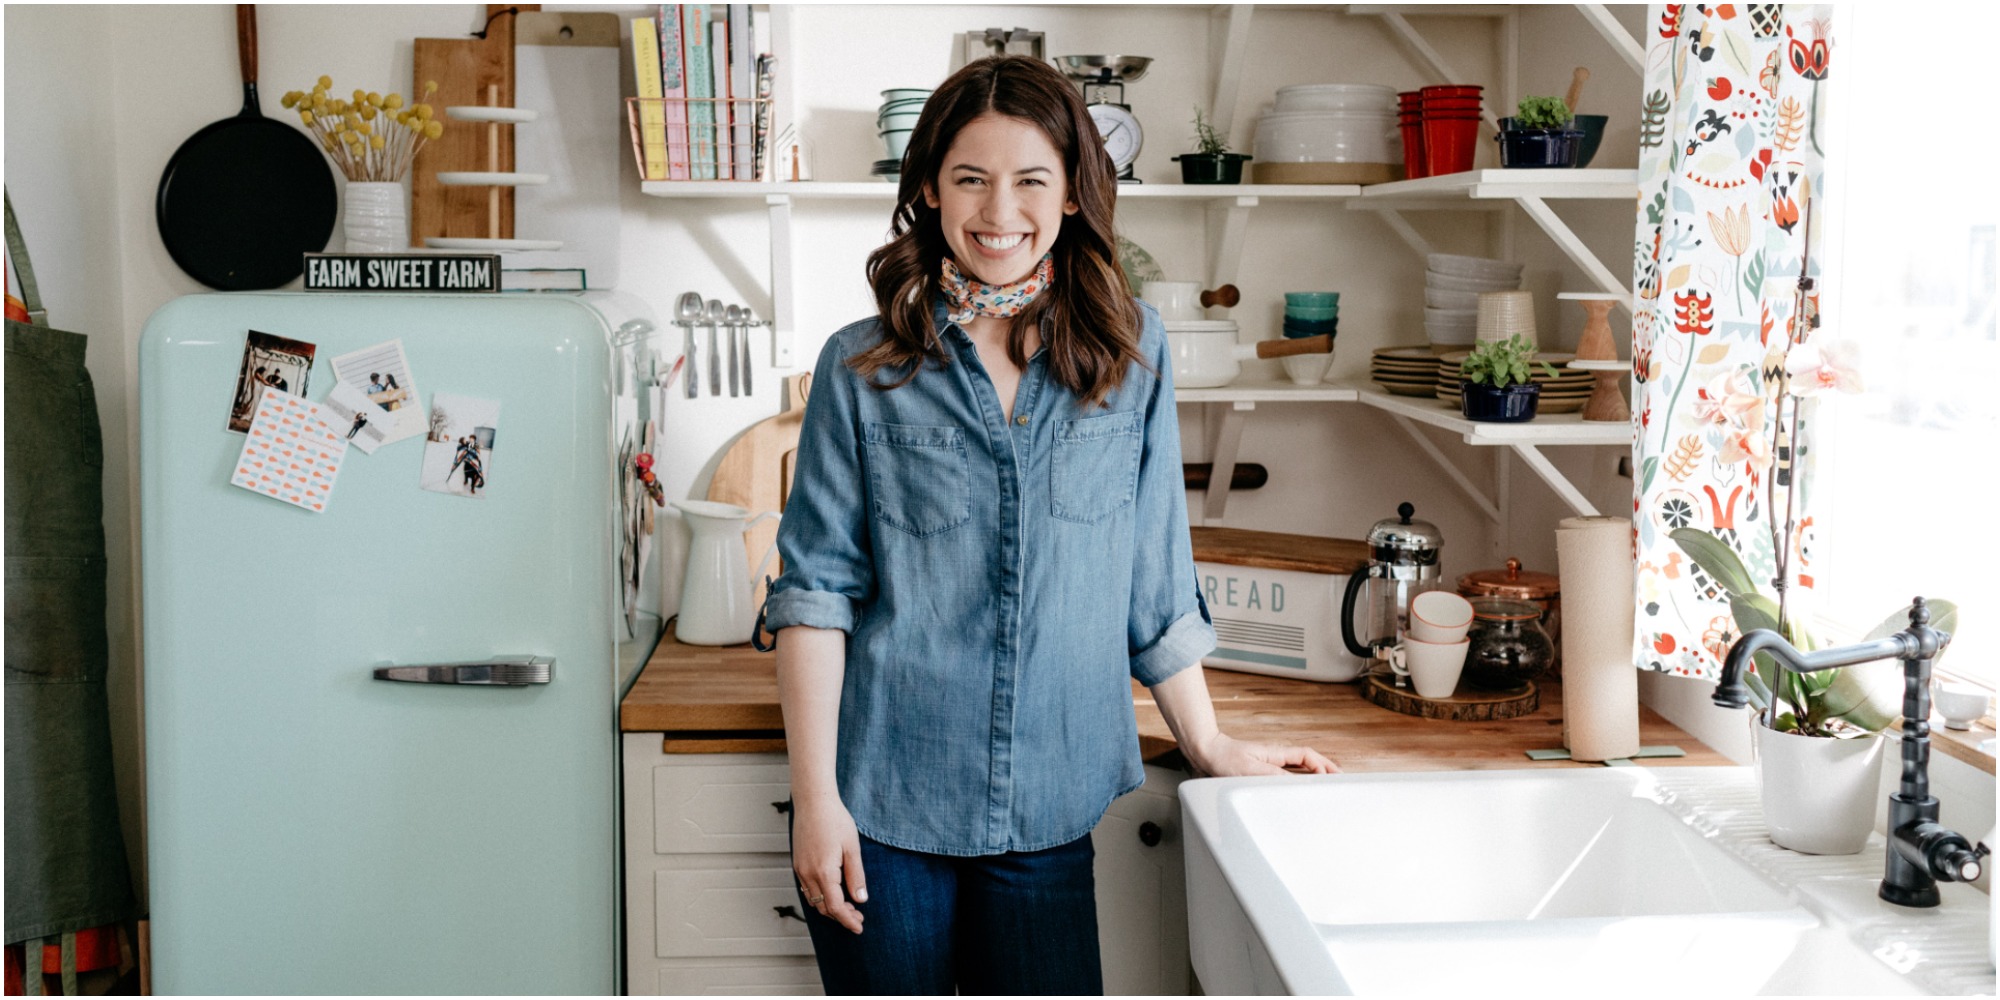 Molly Yeh stars on Food Network's "Girl Meets Farm."